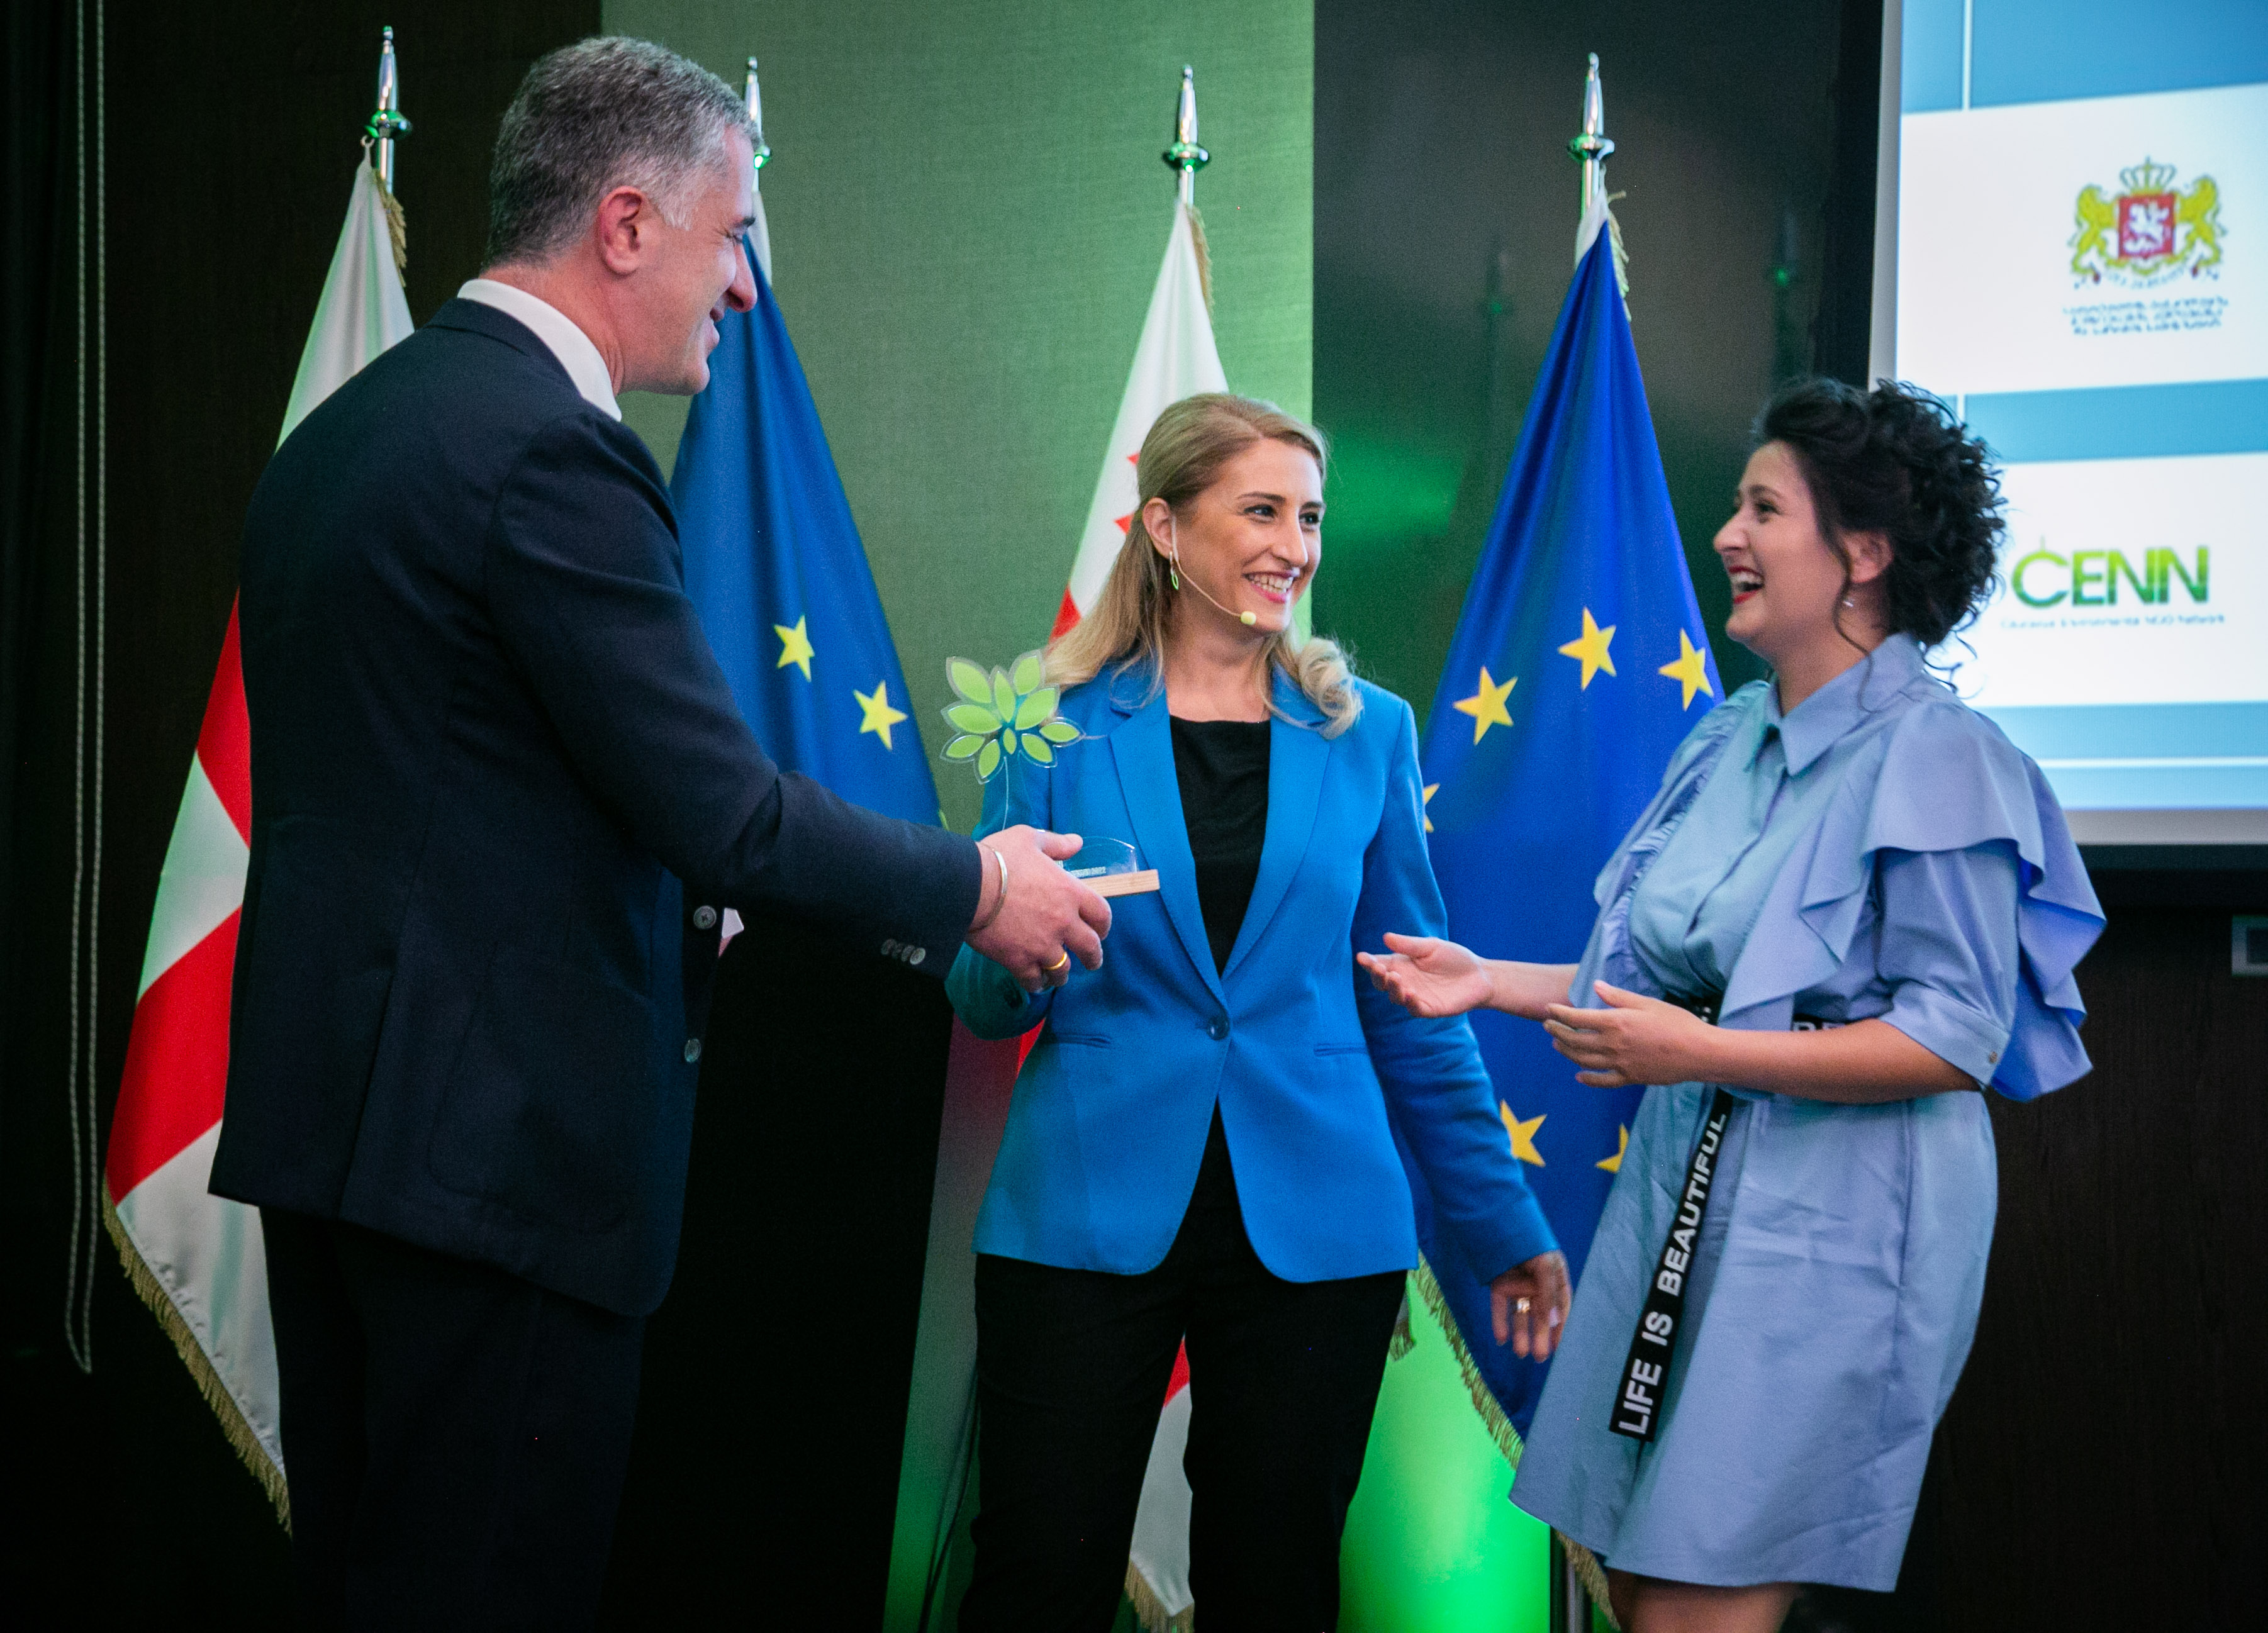 The winners of the contest "Green Award 2022" are revealed